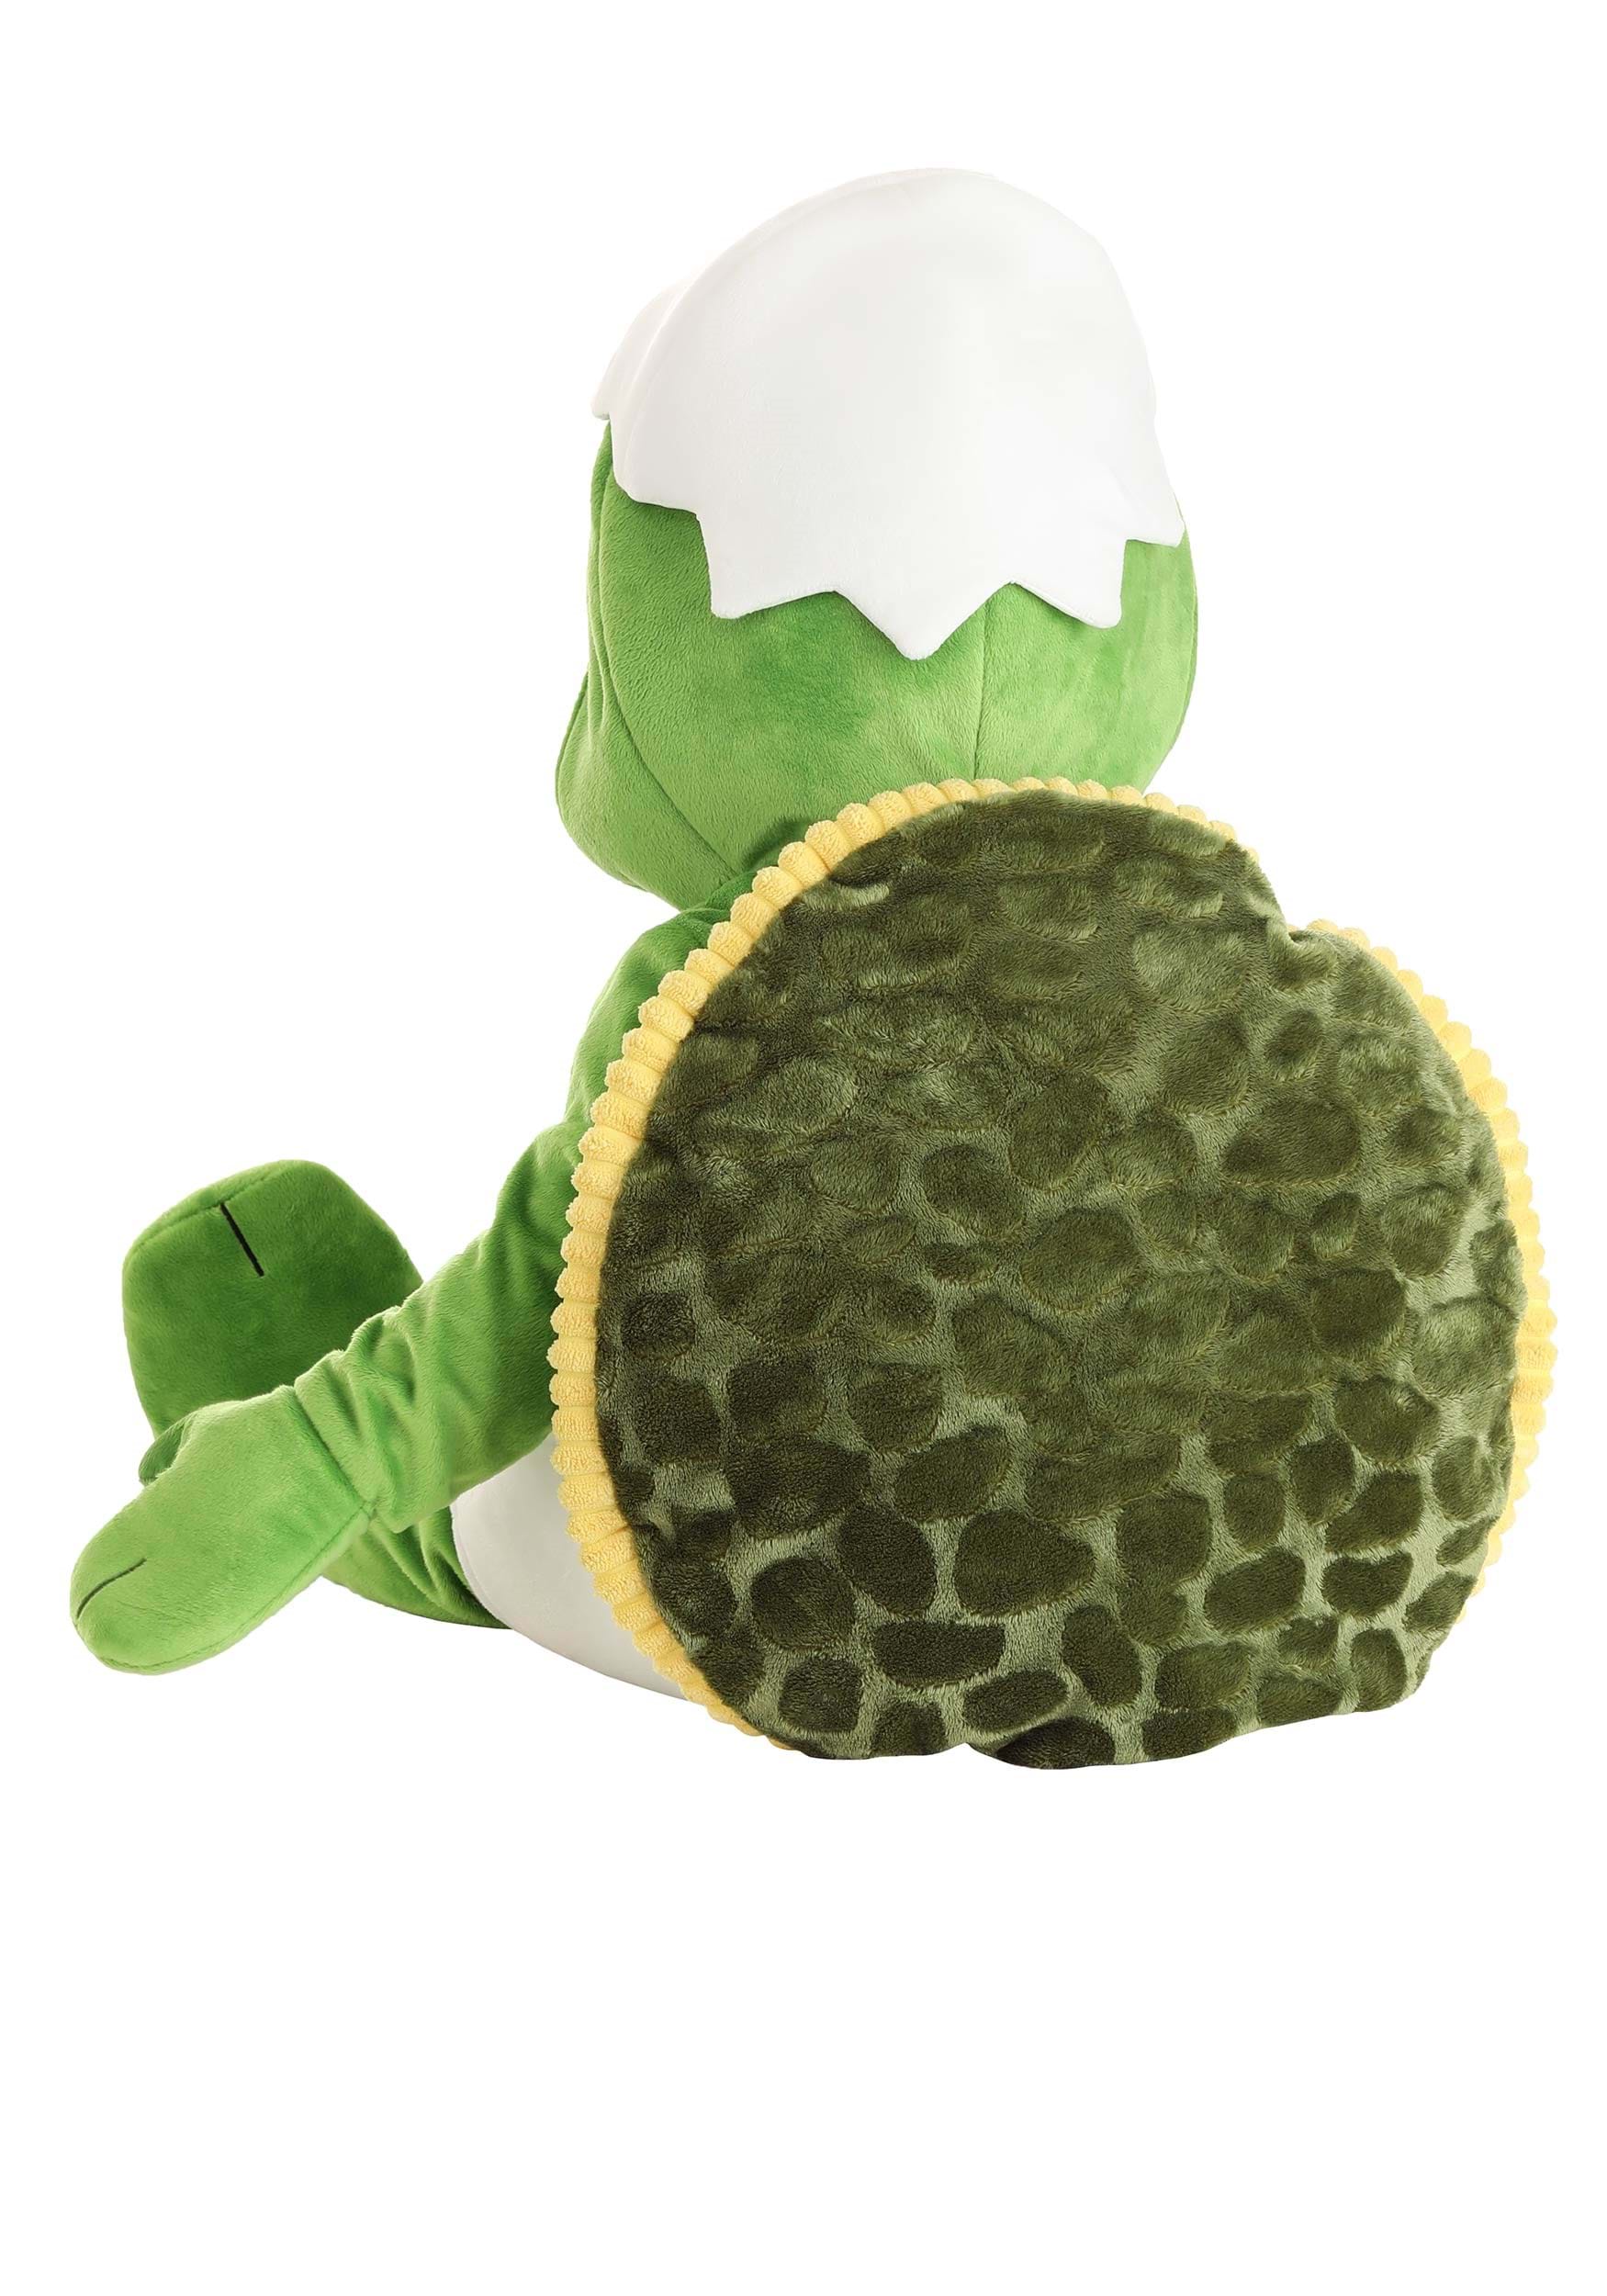 Hatching Infant Turtle Costume